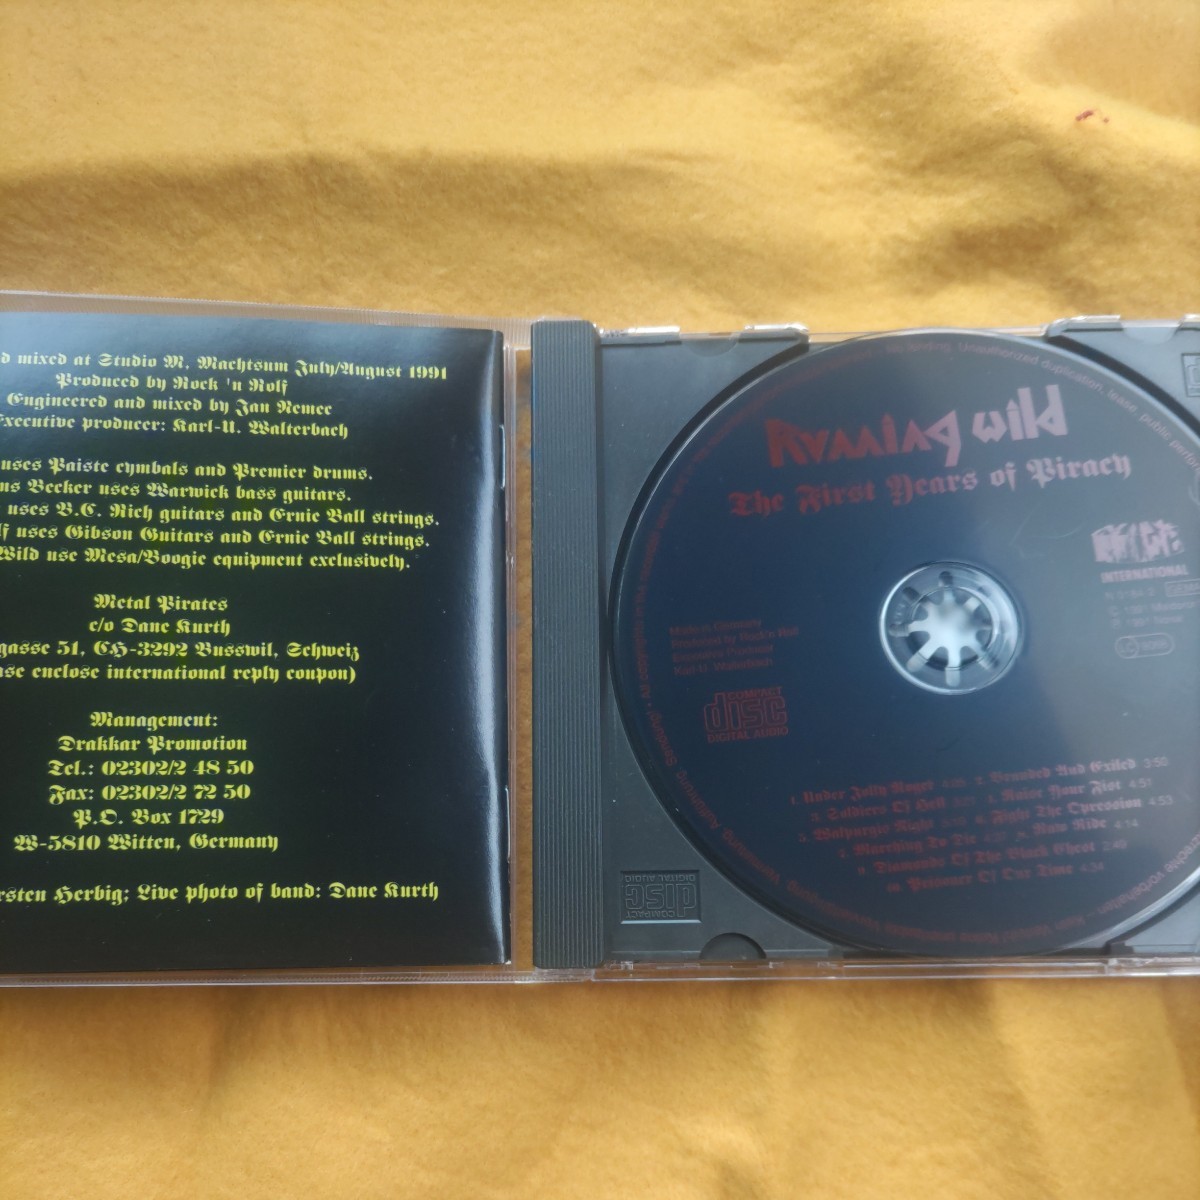 RUNNING WILD「THE FIRST YEARS OF PIRACY」 輸入盤CD　送料込み　ランニング・ワイルド_画像5